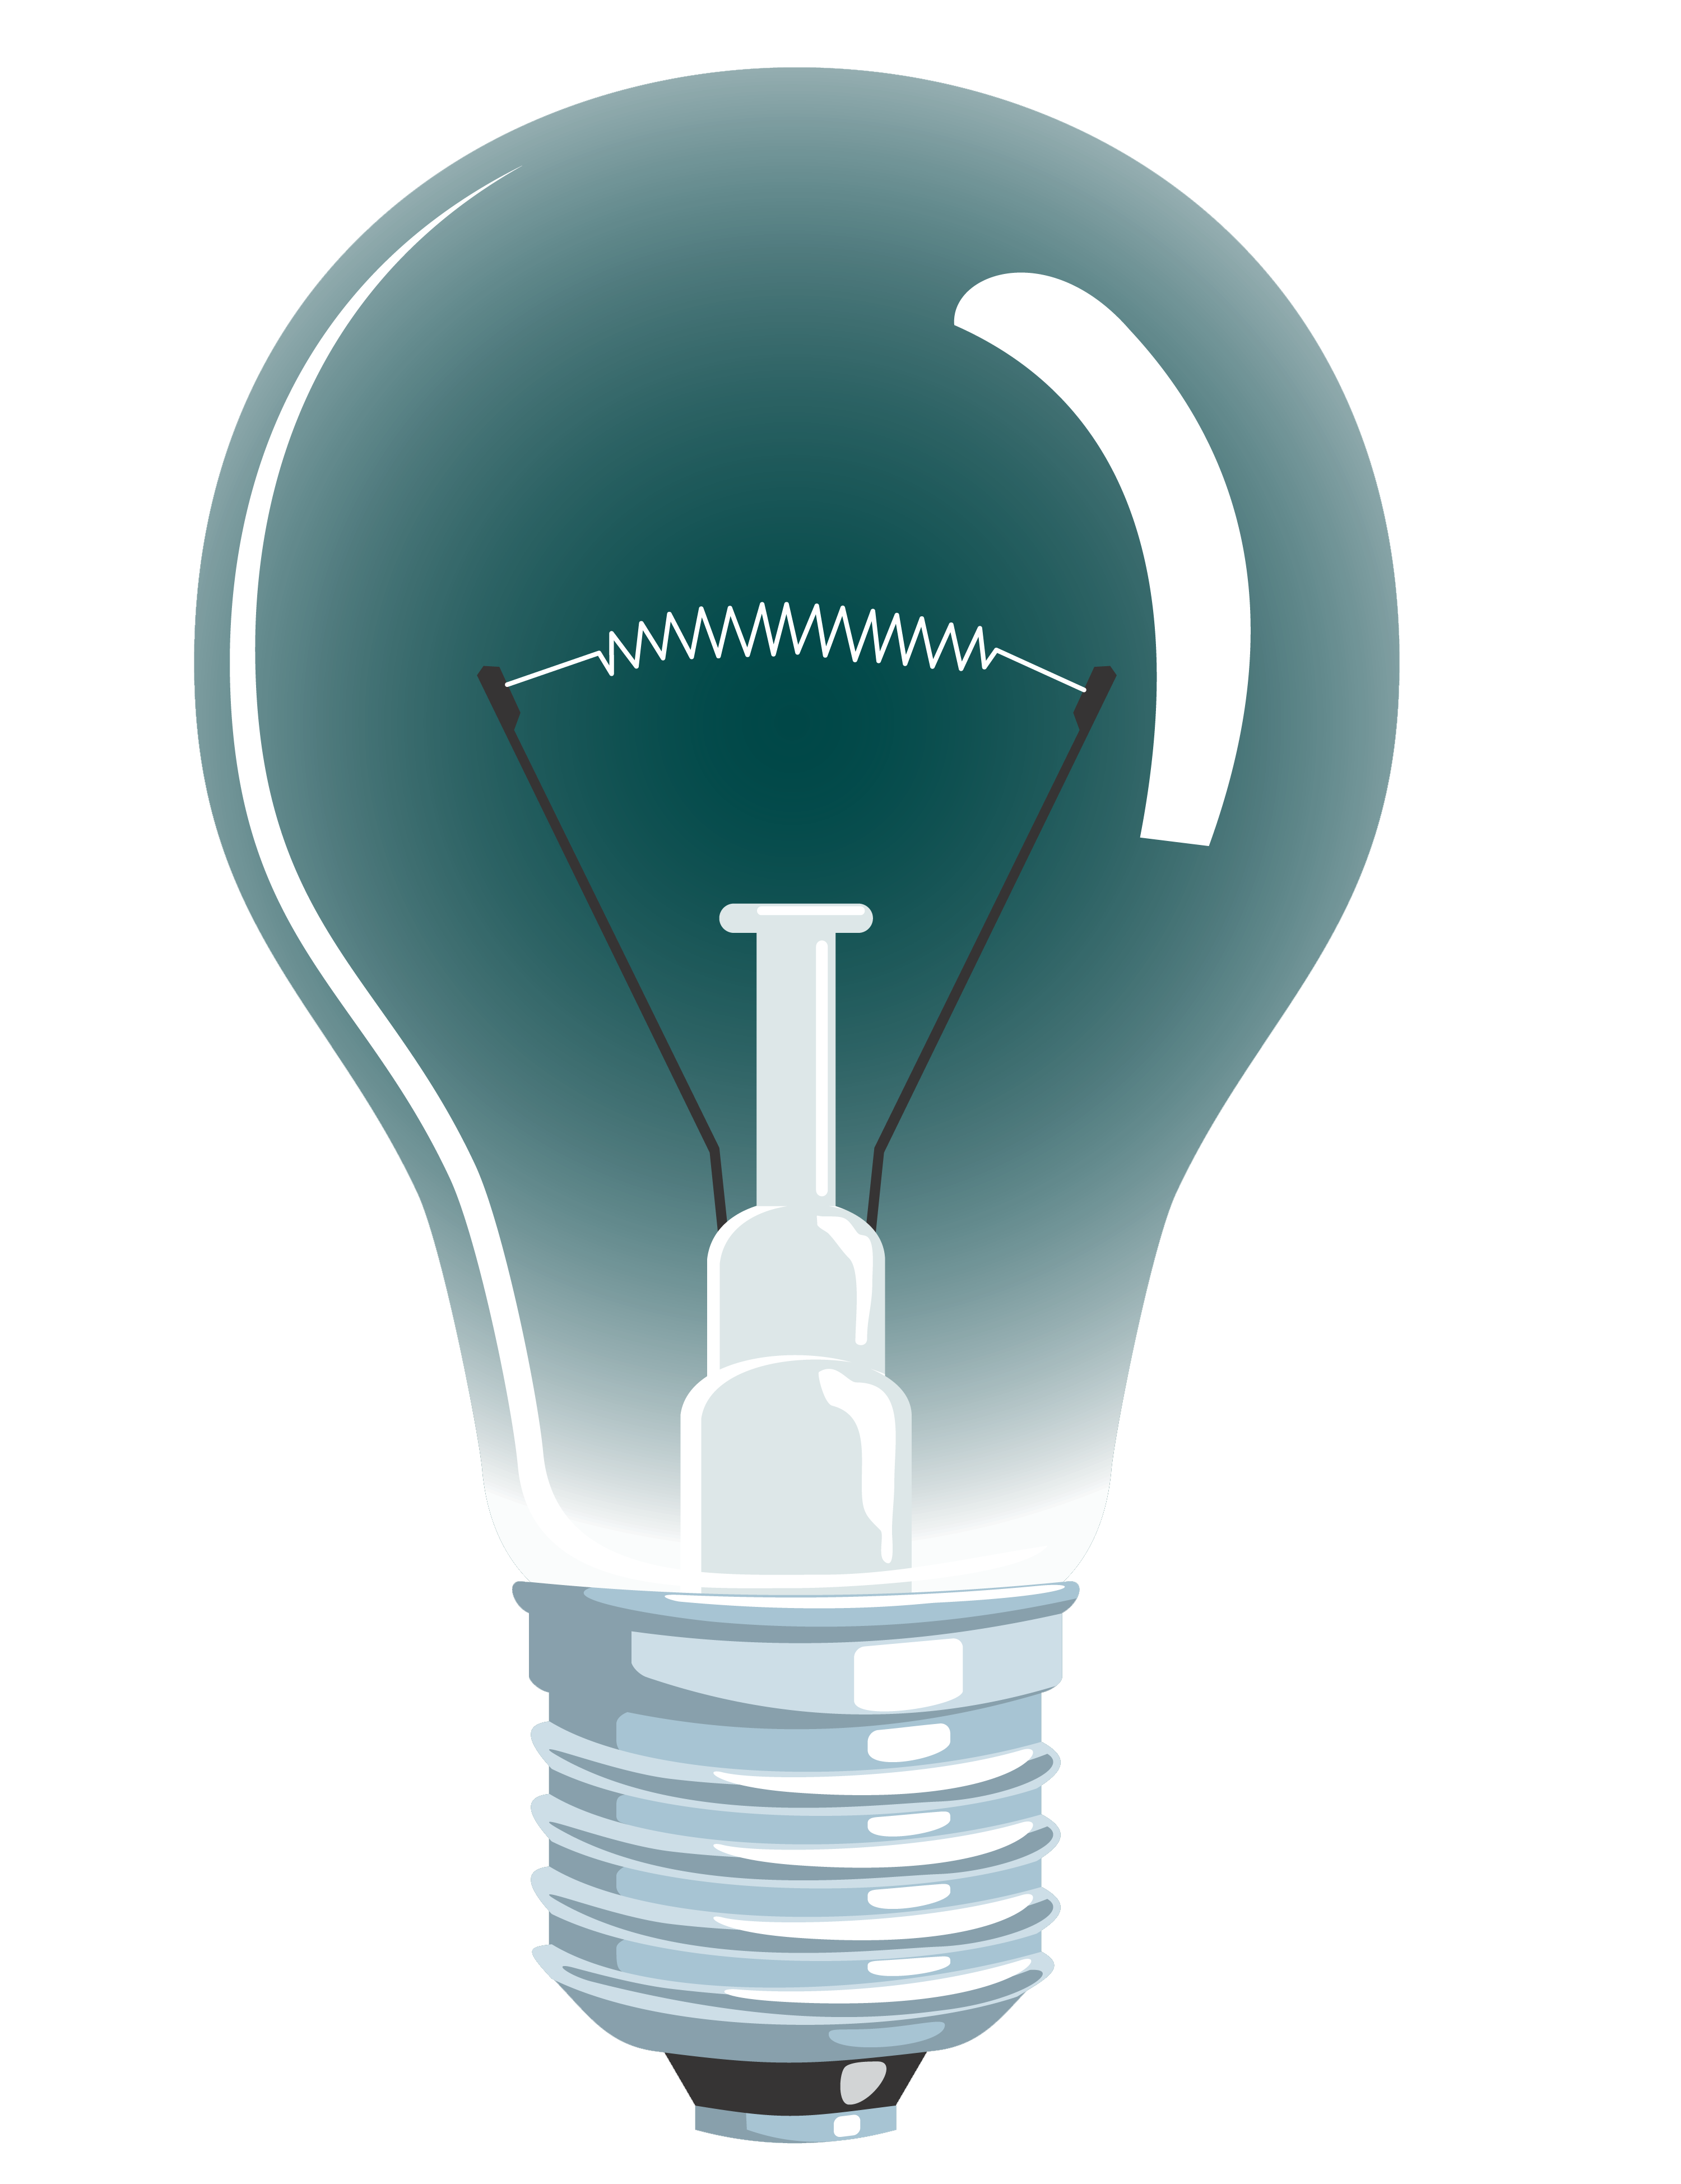 Download This High Resolution Bulb Png Image Without Background - Bulb, Transparent background PNG HD thumbnail